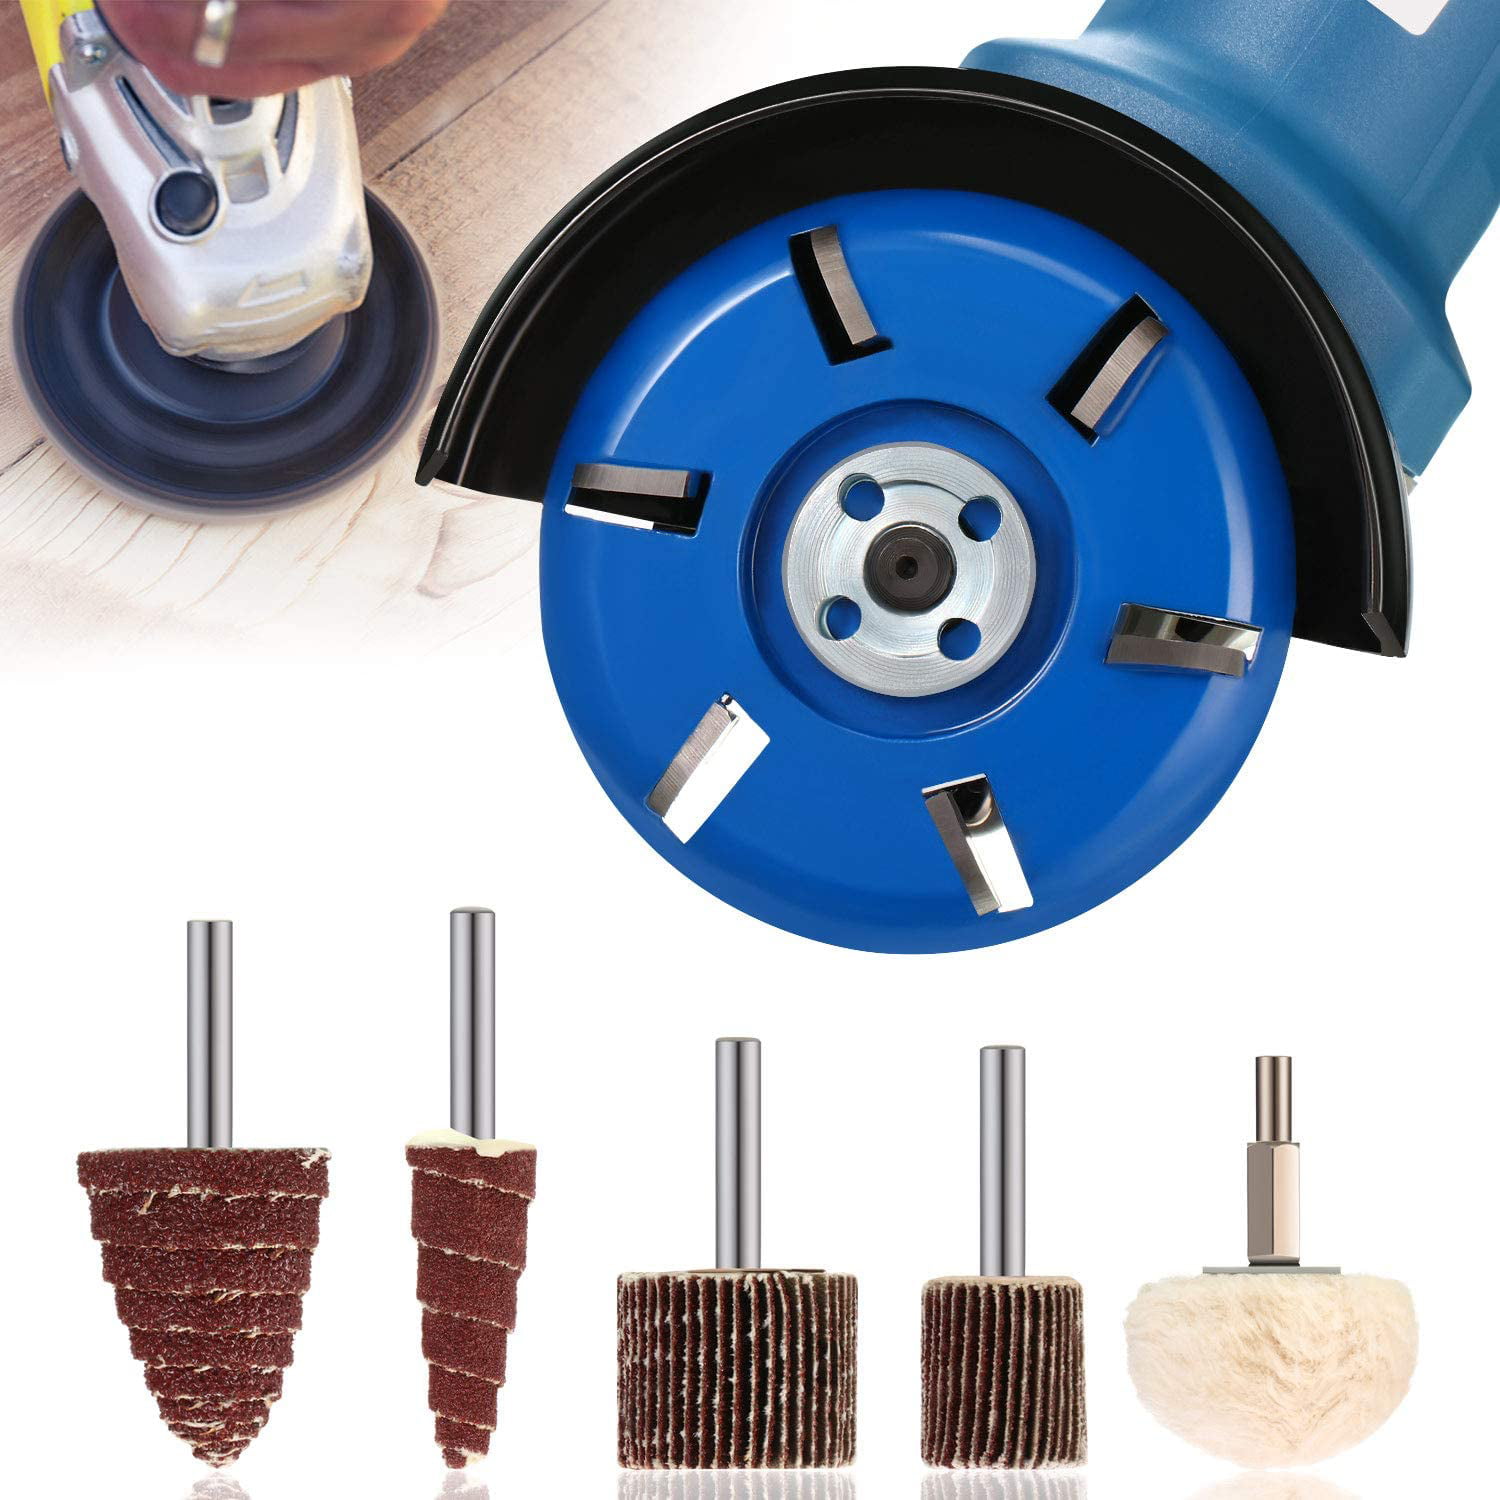 1pc 6 Teeth Wood Carving Disc Milling Cutter Attachment Tools For Angle Grinder 